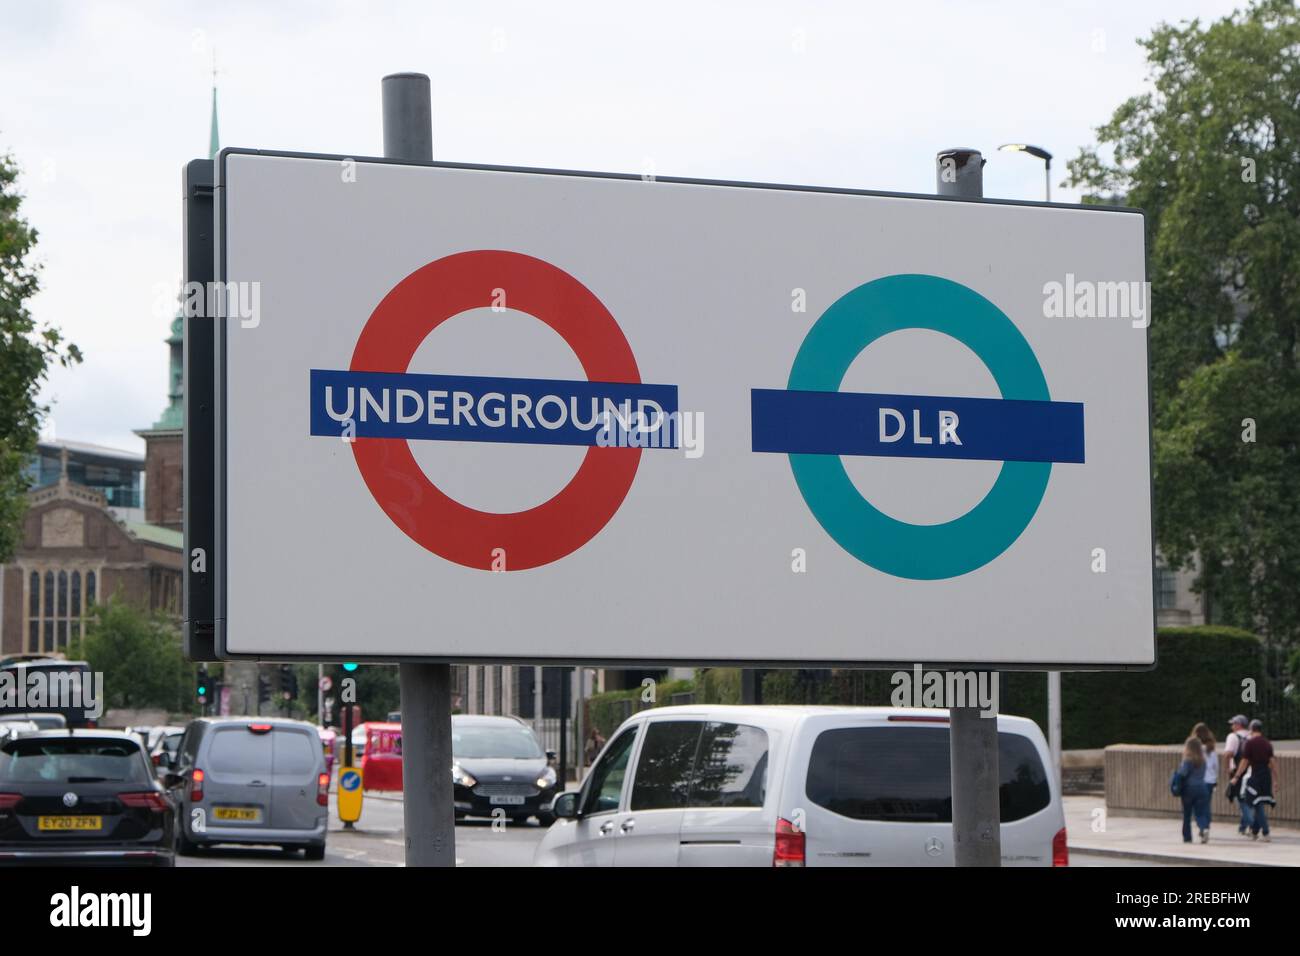 London, UK. A TfL Underground and DLR sign with the distinctive roundal logos at Tower Hill. Stock Photo